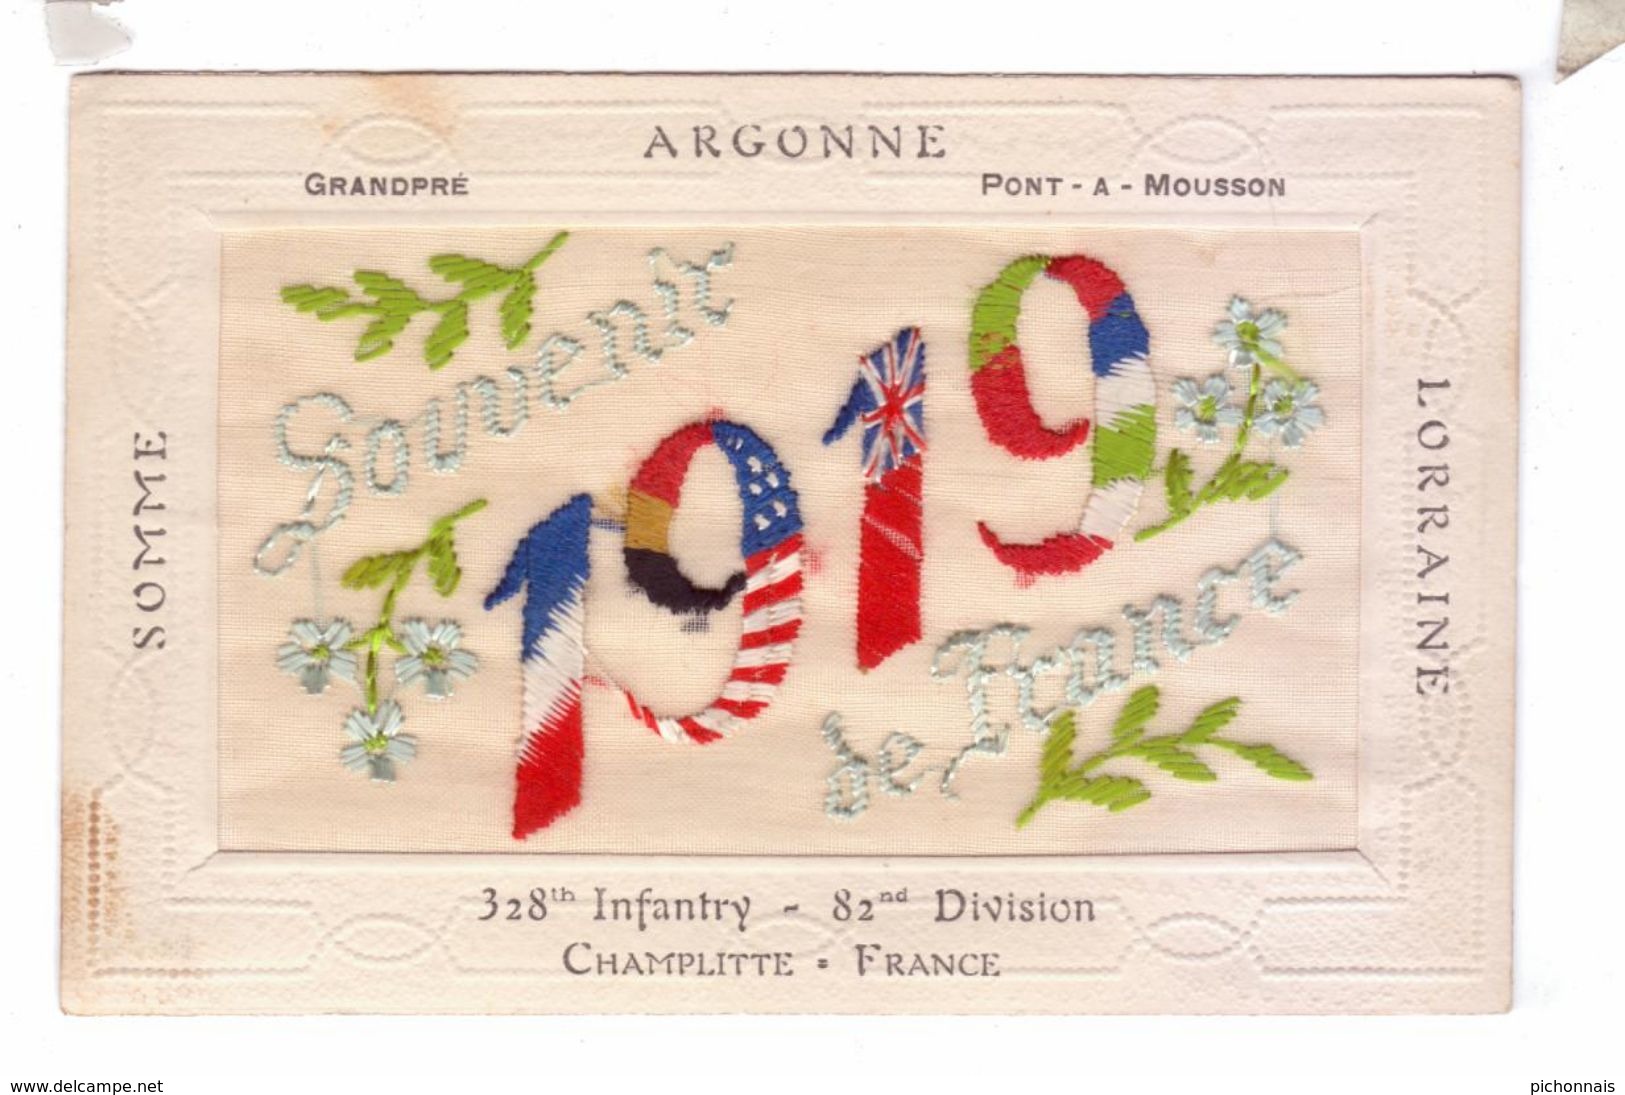 Guerre 14 18 Carte Brodee Drapeau Allies Argonne Grand Pre Pont A Mousson 328 Th Infantry Champlitte Embroidered - Heimat